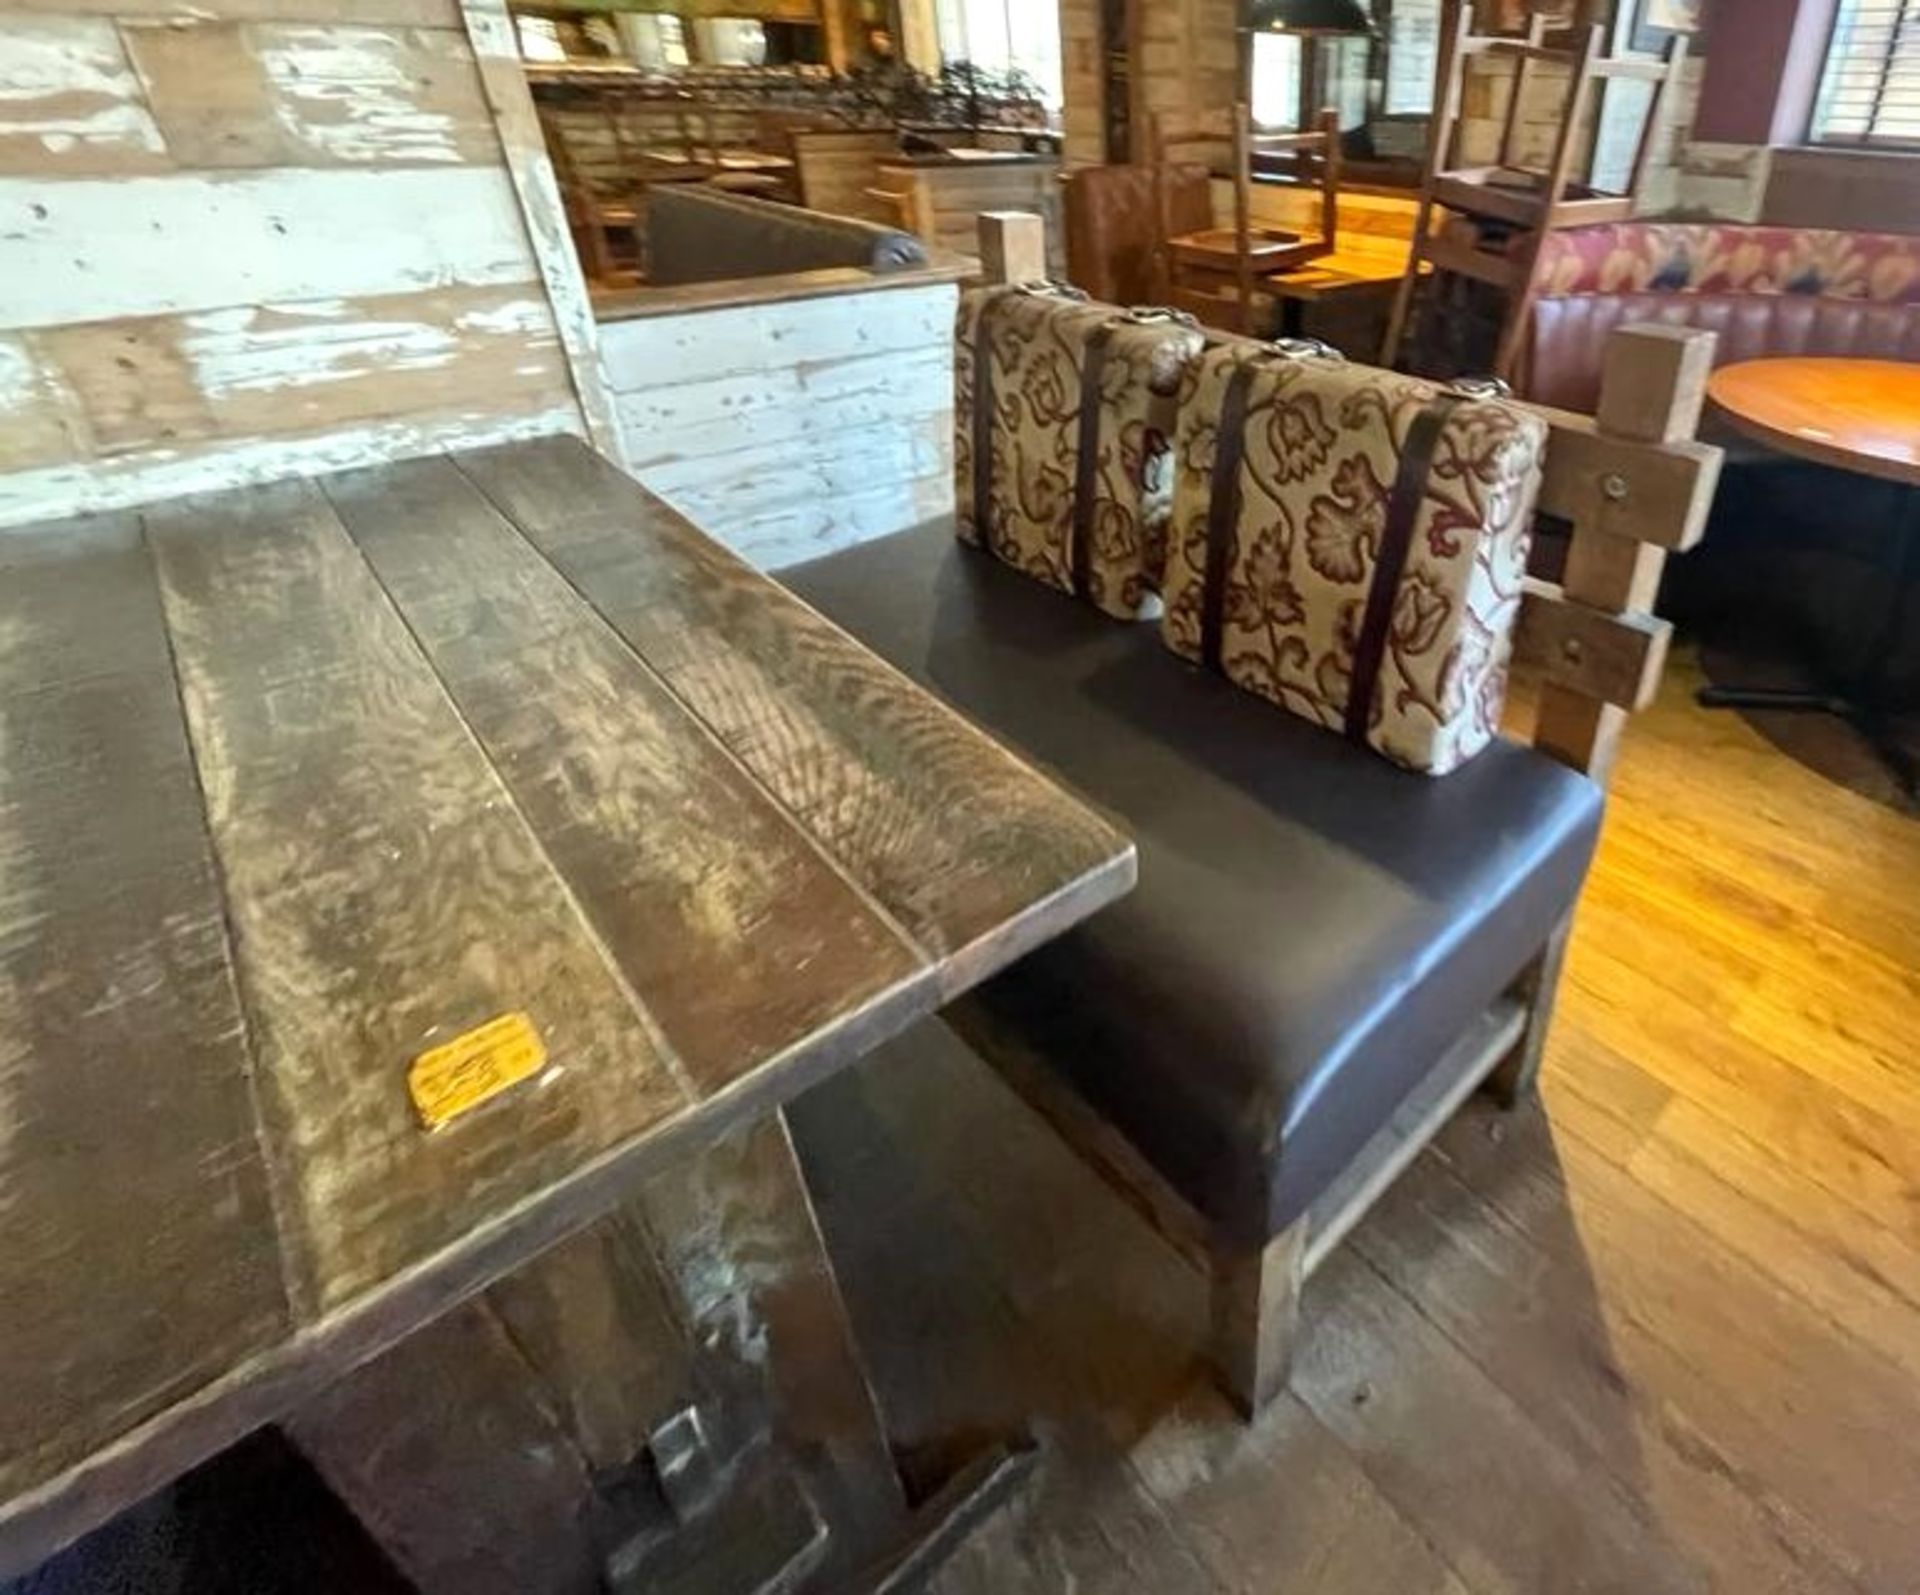 2 x Rustic Seating Benches Featuring Timber Frames, Brown Faux Leather Seat Pads and Floral Fabric - Image 9 of 13